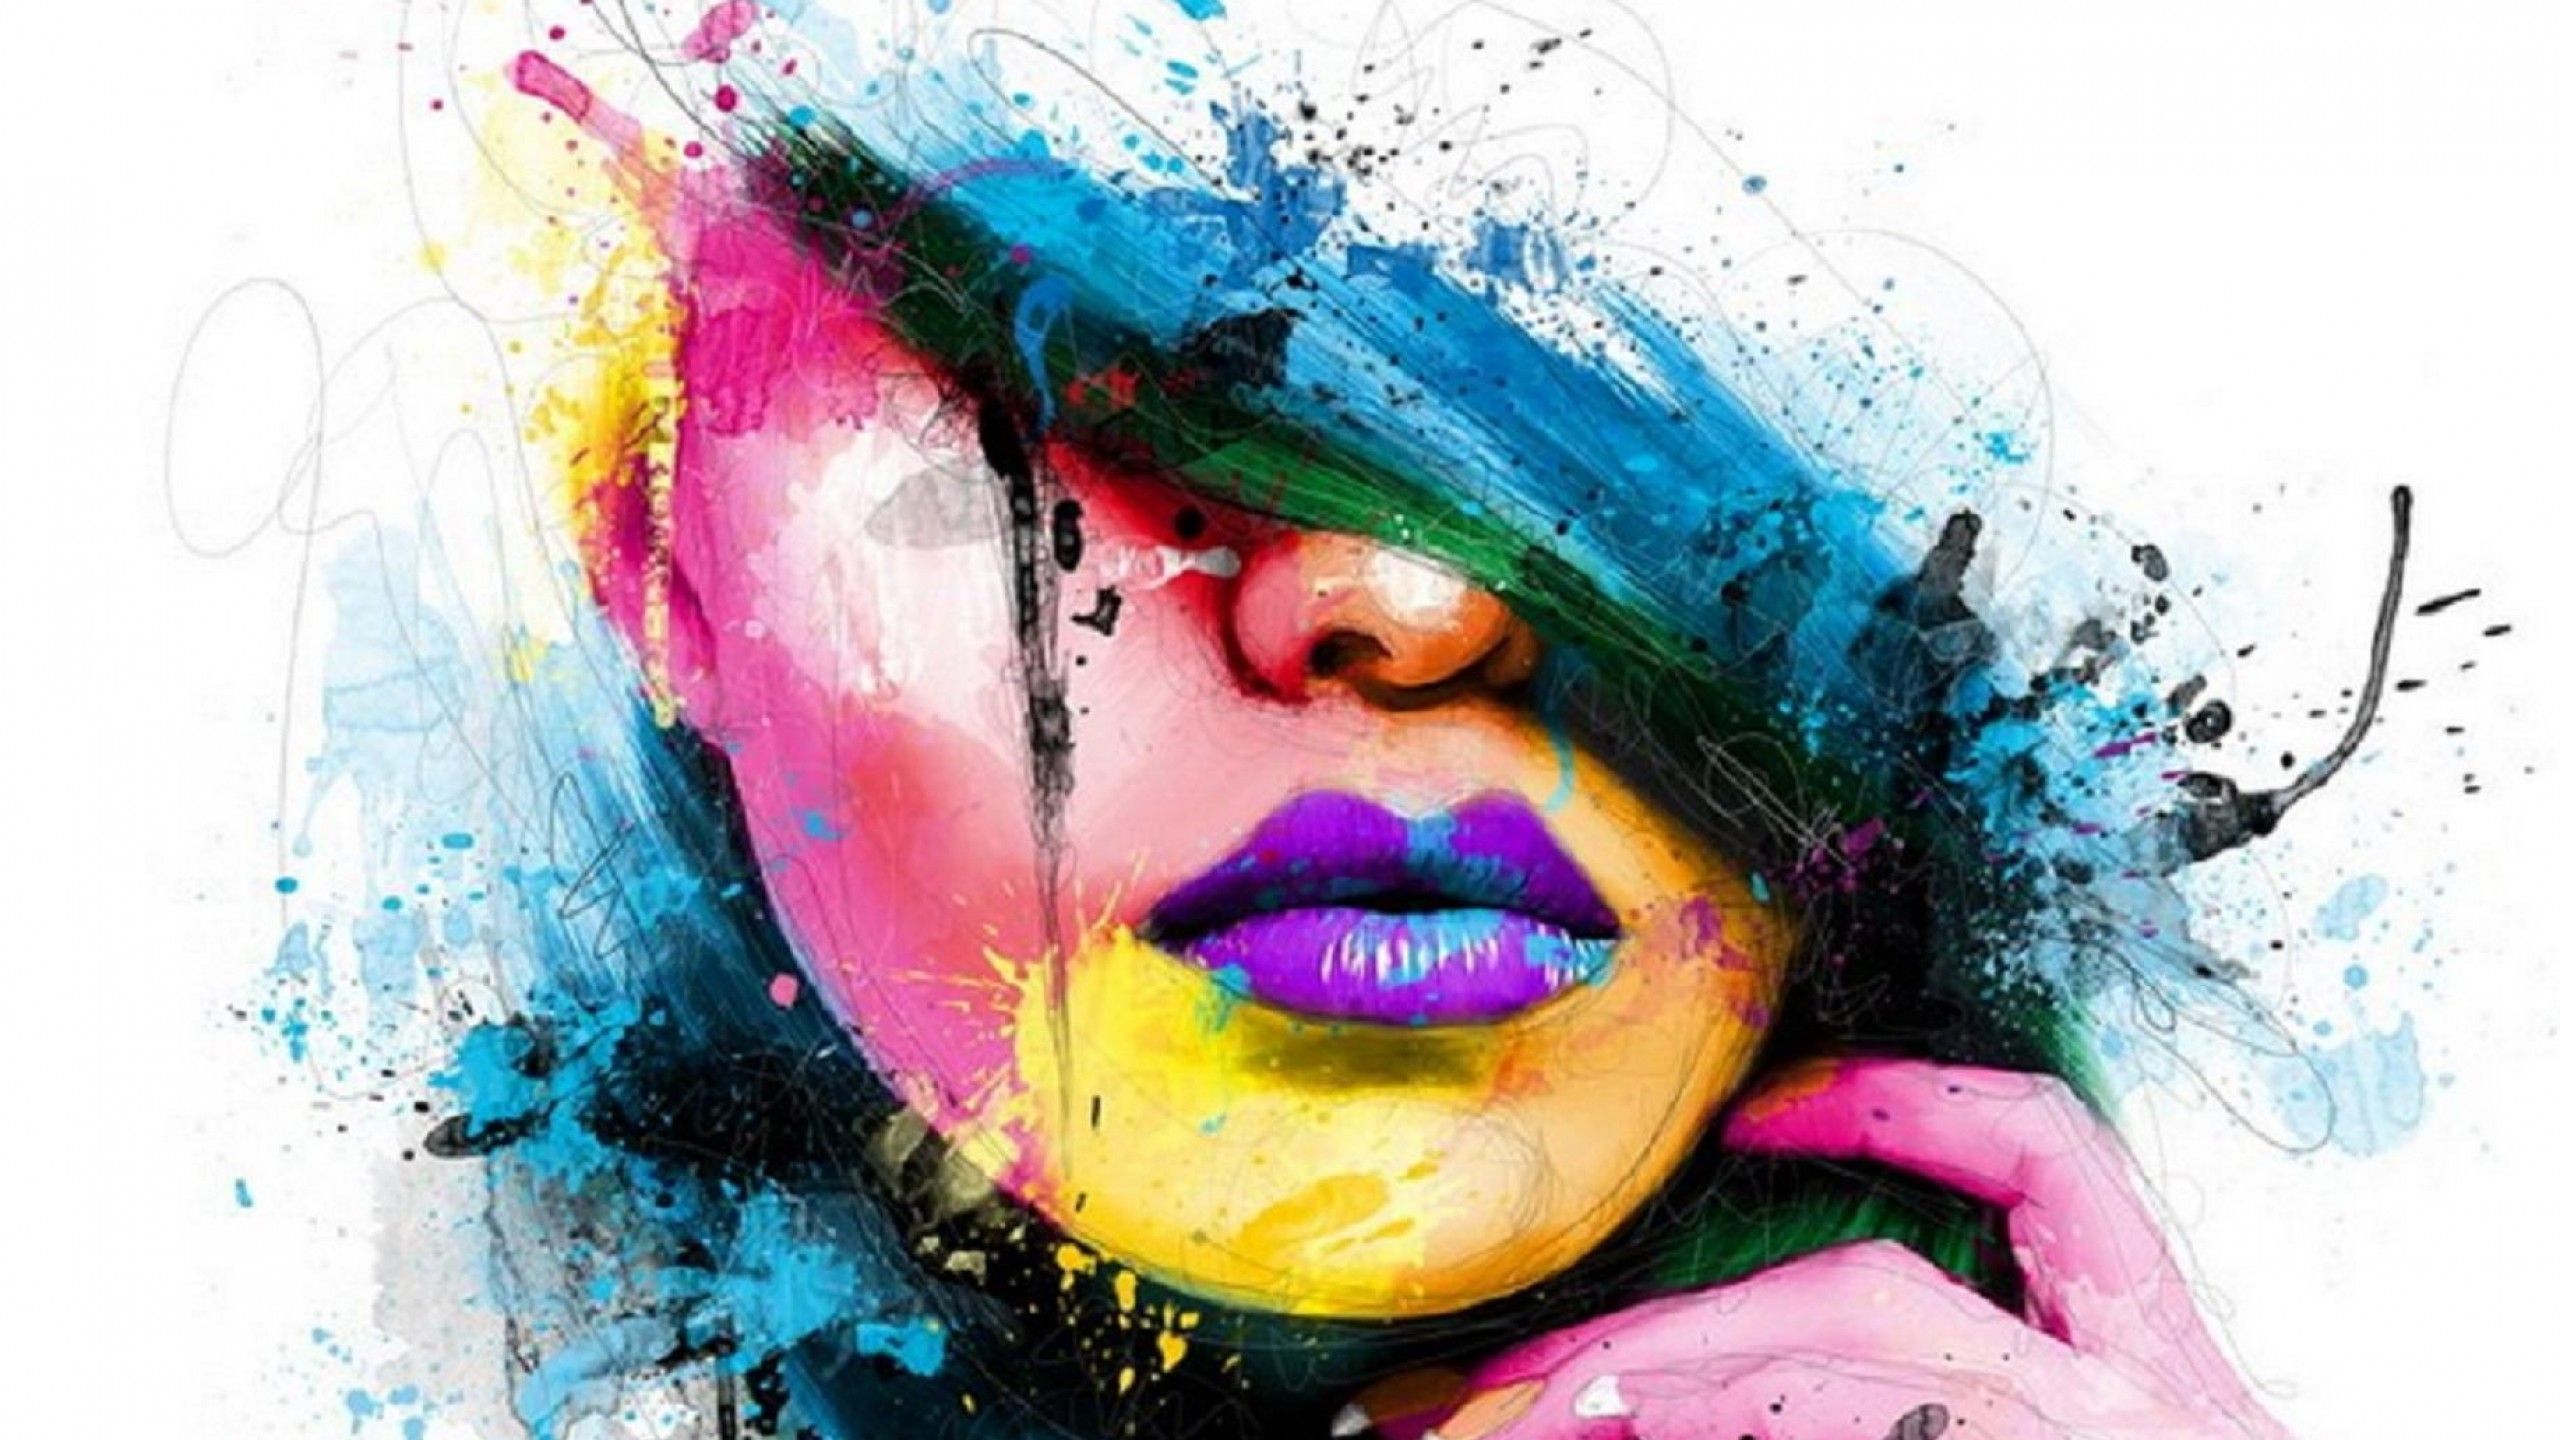 Click here to download in HD Format >> Painting Art HD Wallpaper 17 /wallpap. Face art, Colorful art, Oil painting on canvas